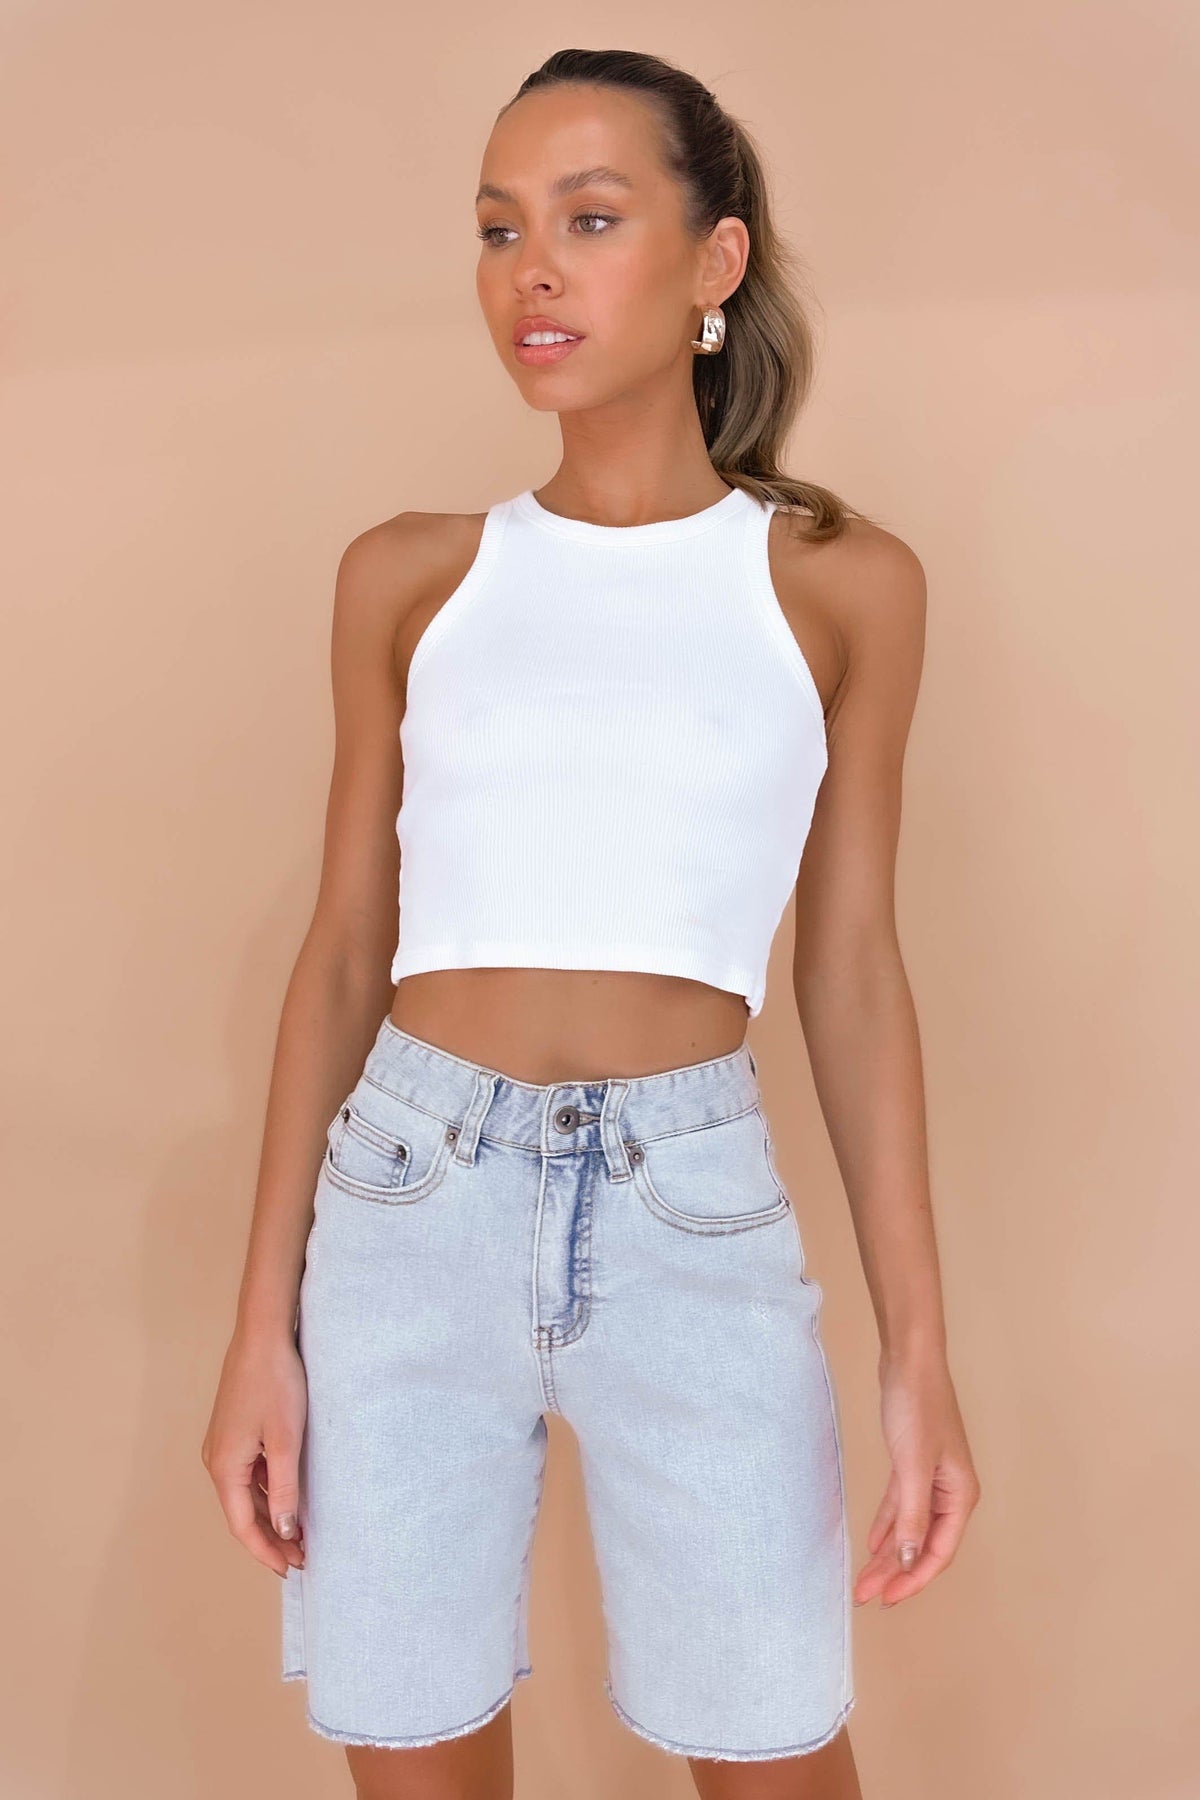 Charlisse Shorts, BLUE, BOTTOMS, COTTON &amp; POLYESTER, COTTON AND POLYESTER, DENIM, HIGH WAISTED, HIGH WAISTED SHORTS, new arrivals, POLYESTER AND COTTON, SHORTS, , -MISHKAH